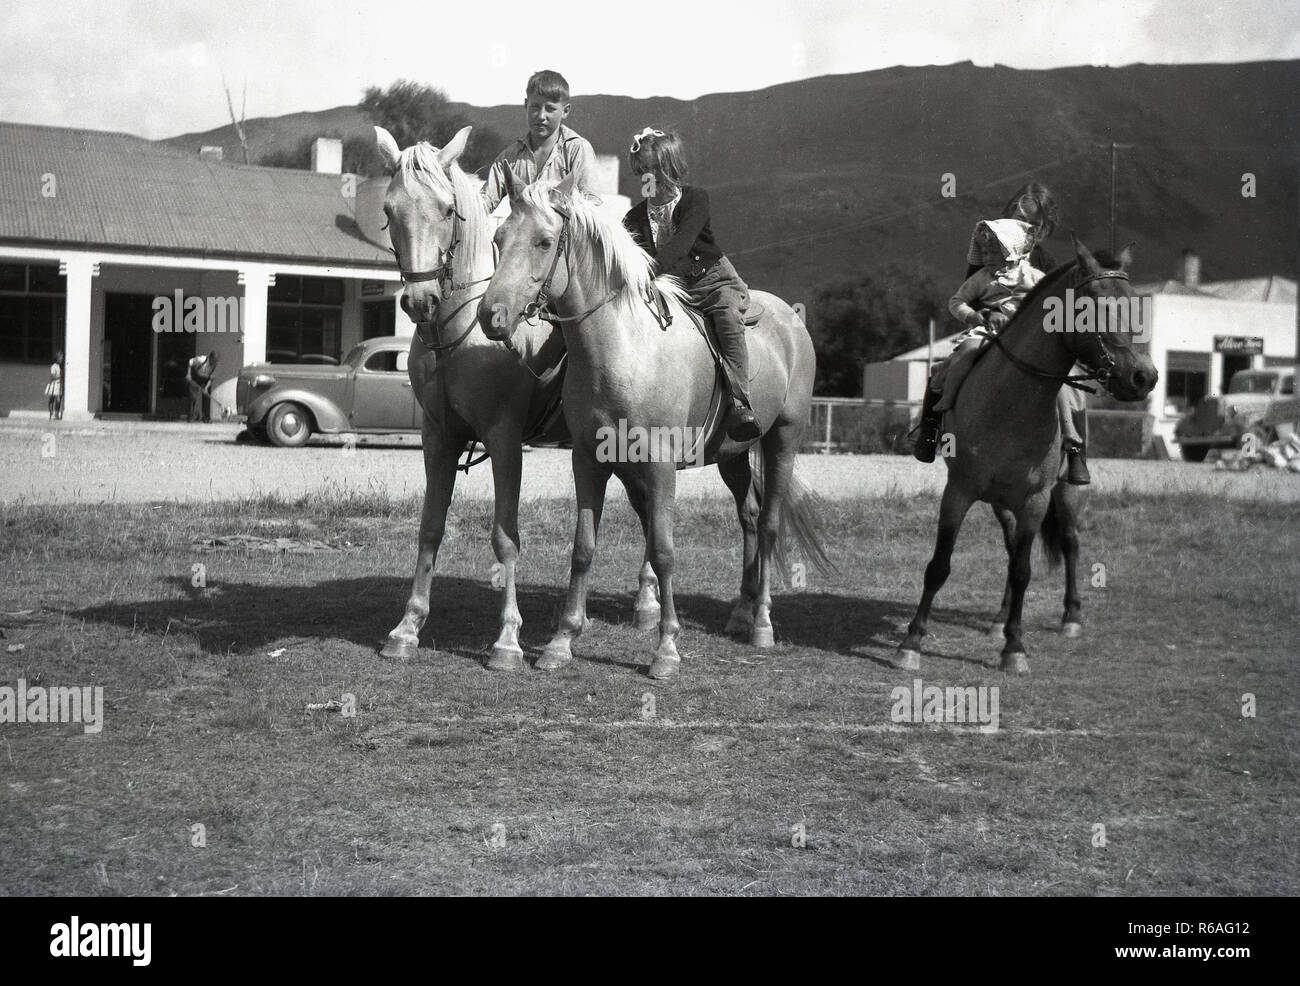 1940, historical, young children on horses outside their property in mid-america. Stock Photo